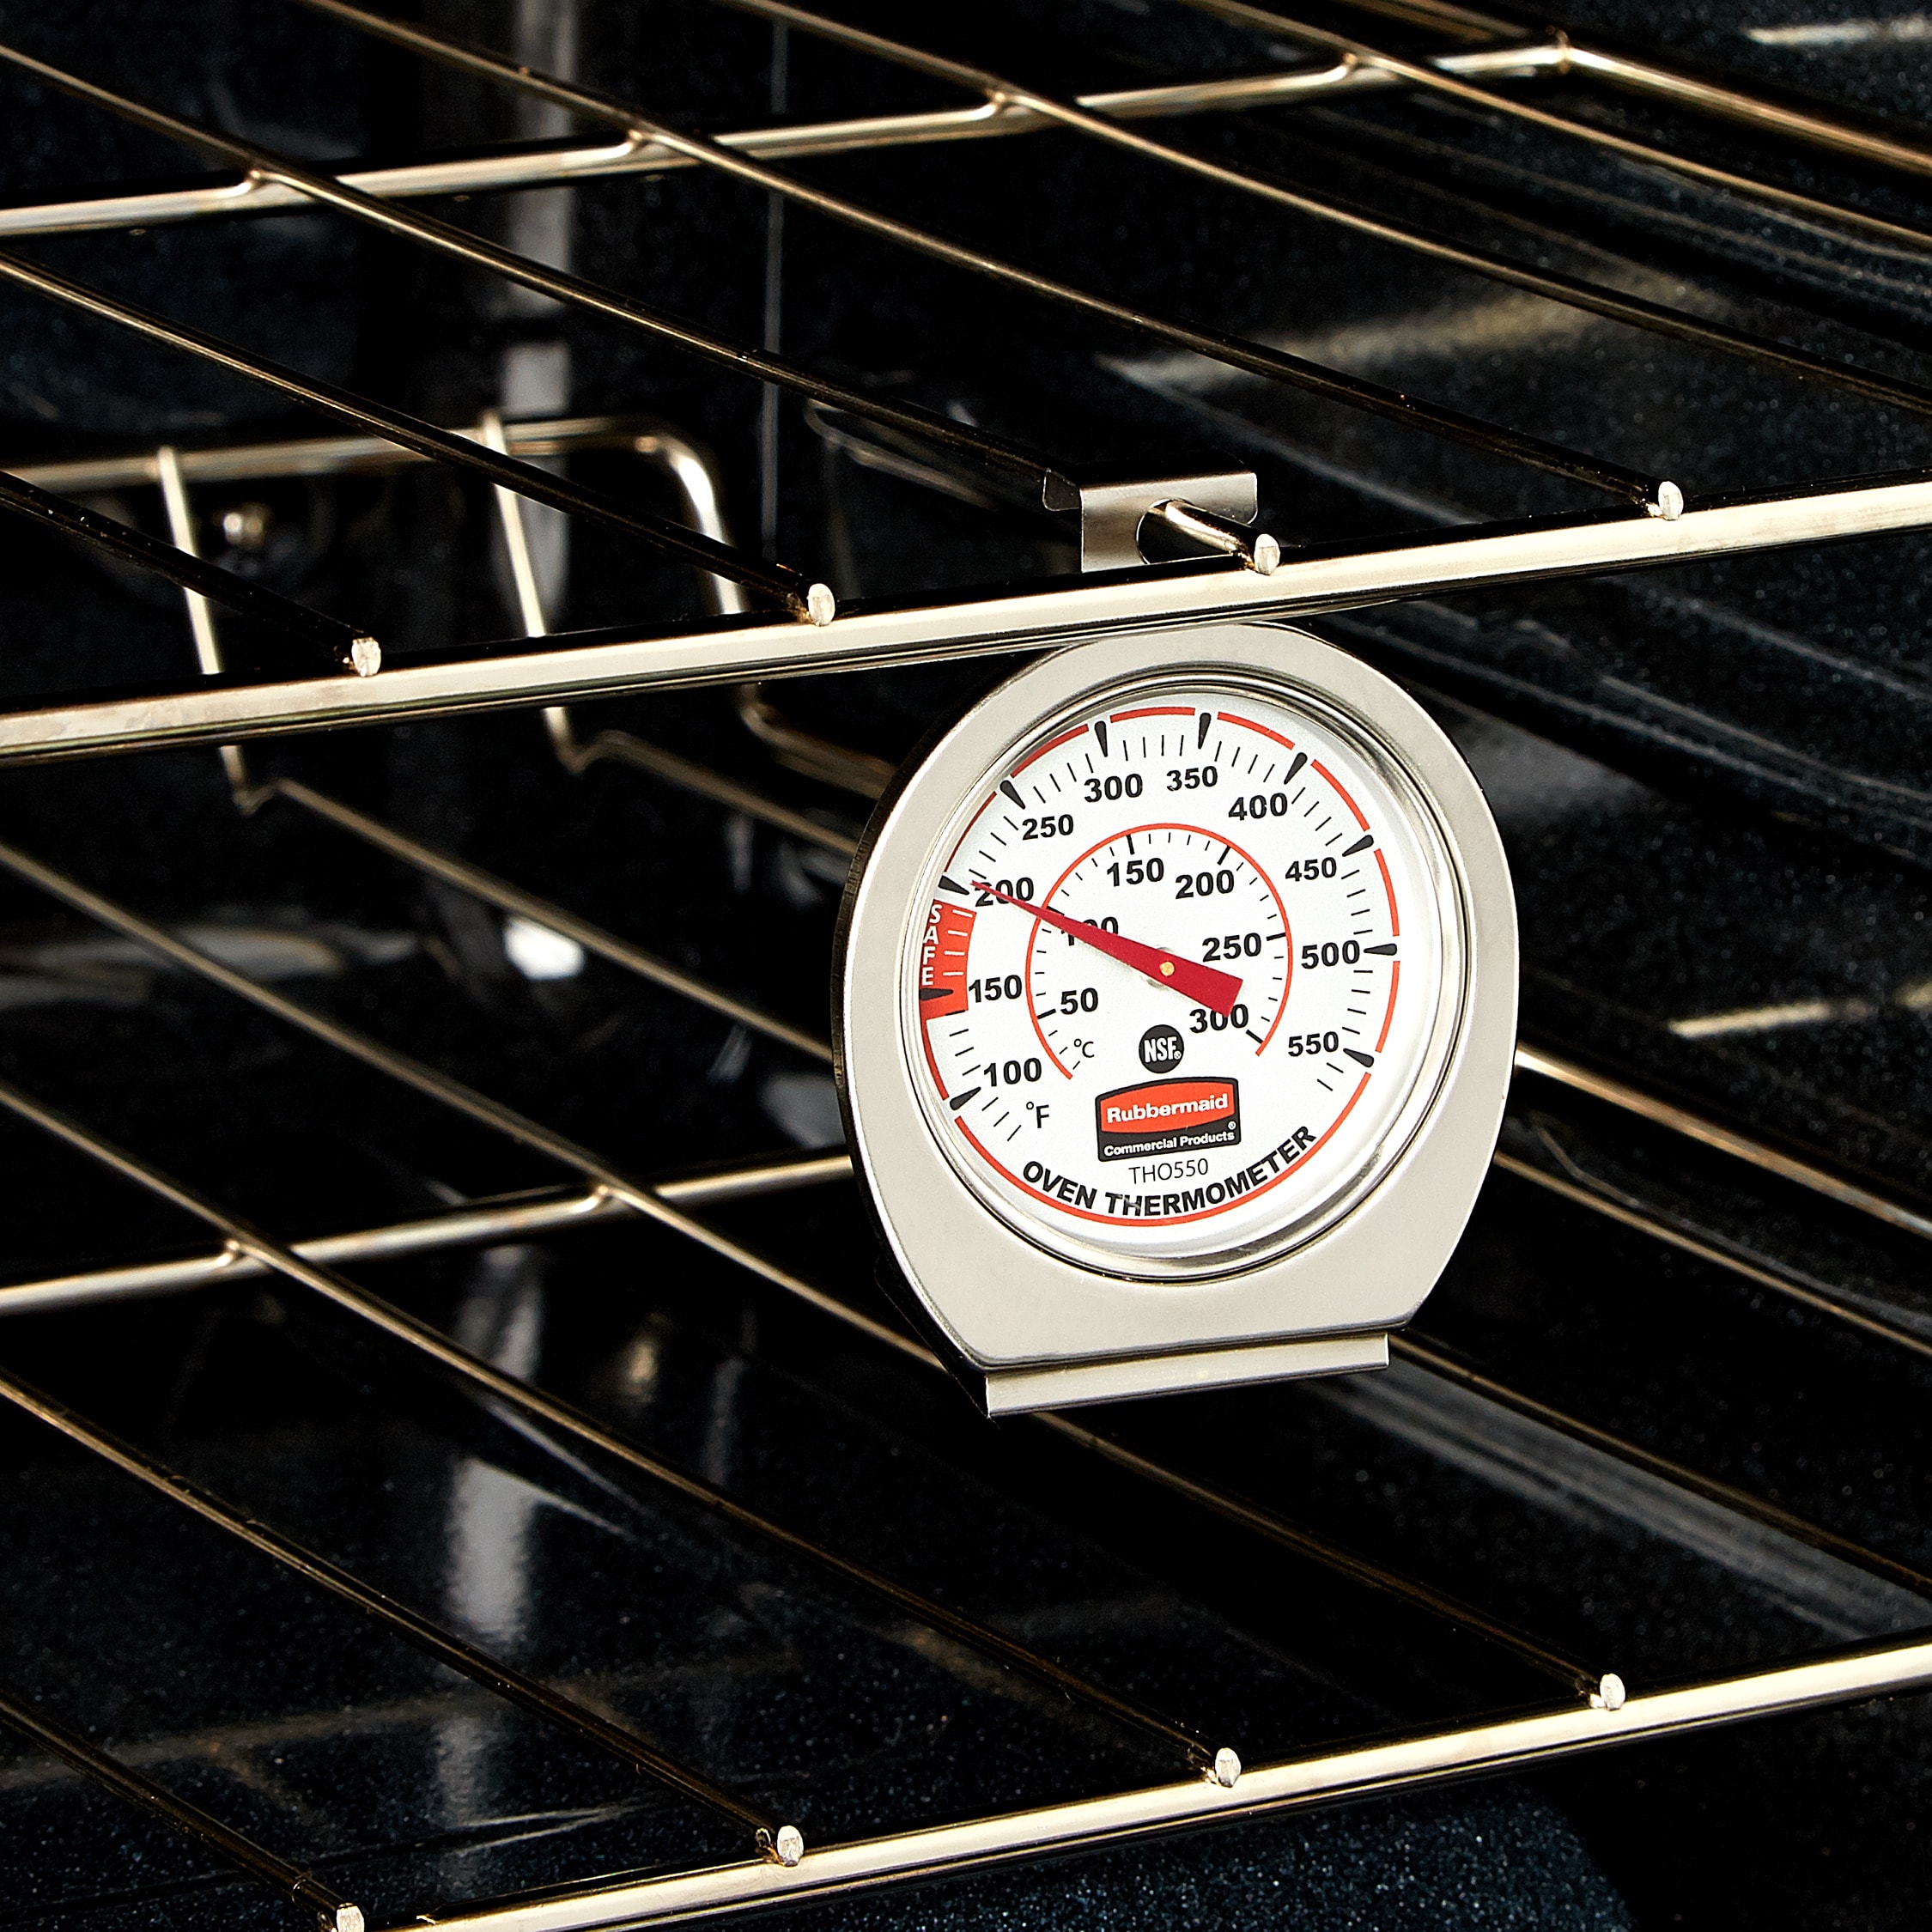 Rubbermaid Commercial Stainless Steel Oven Monitoring Thermometer